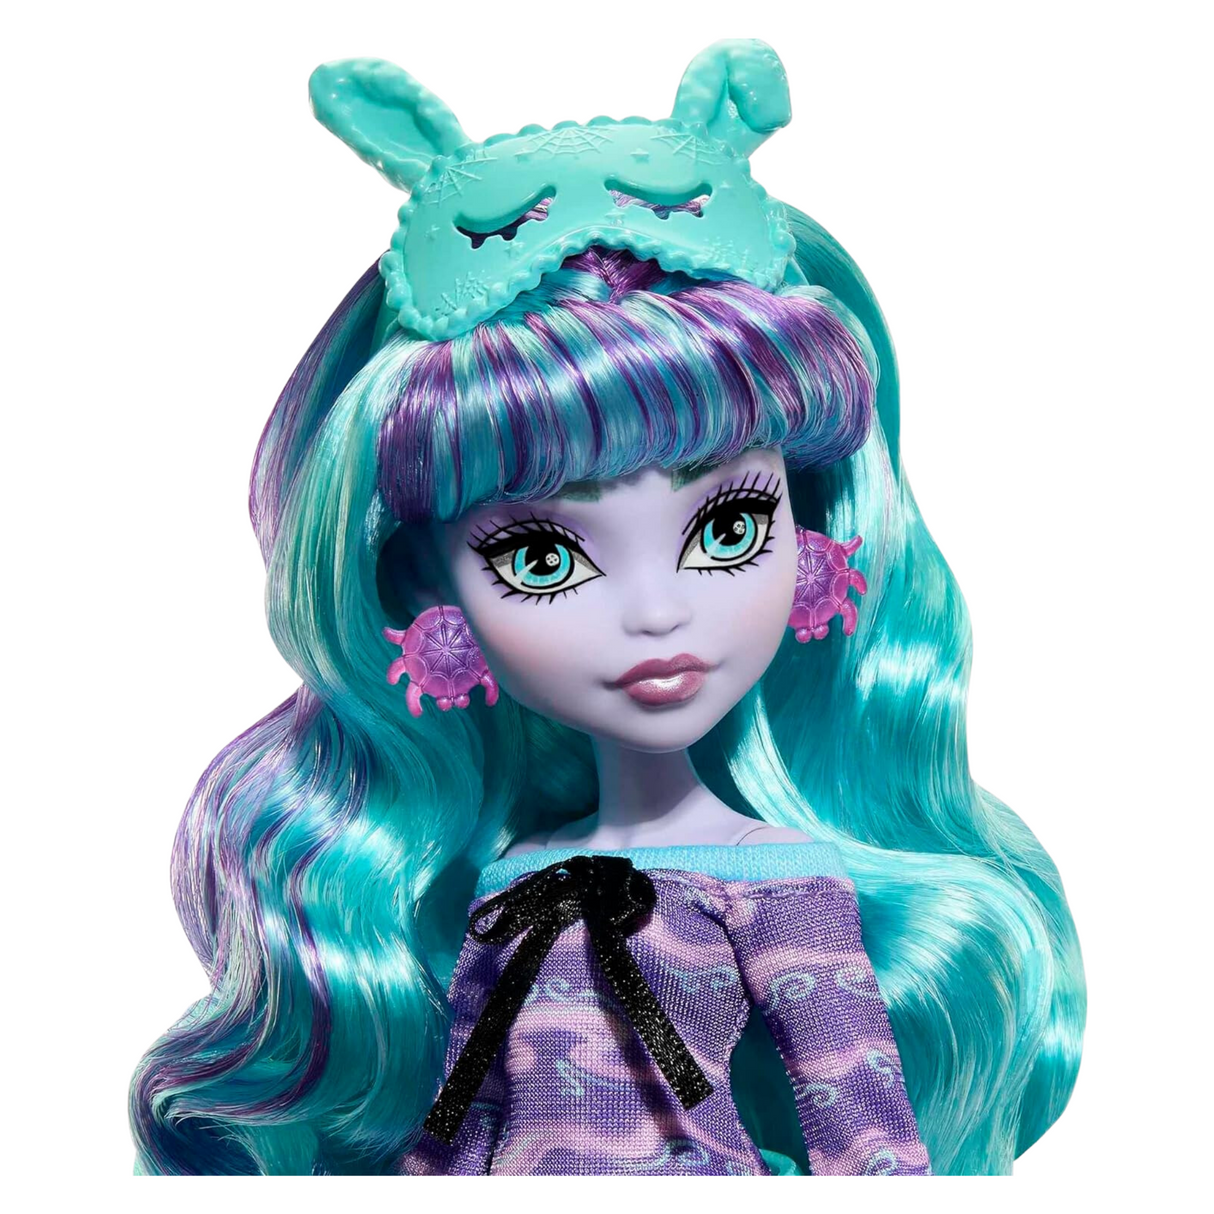 Monster High Doll And Sleepover Accessories - Twyla